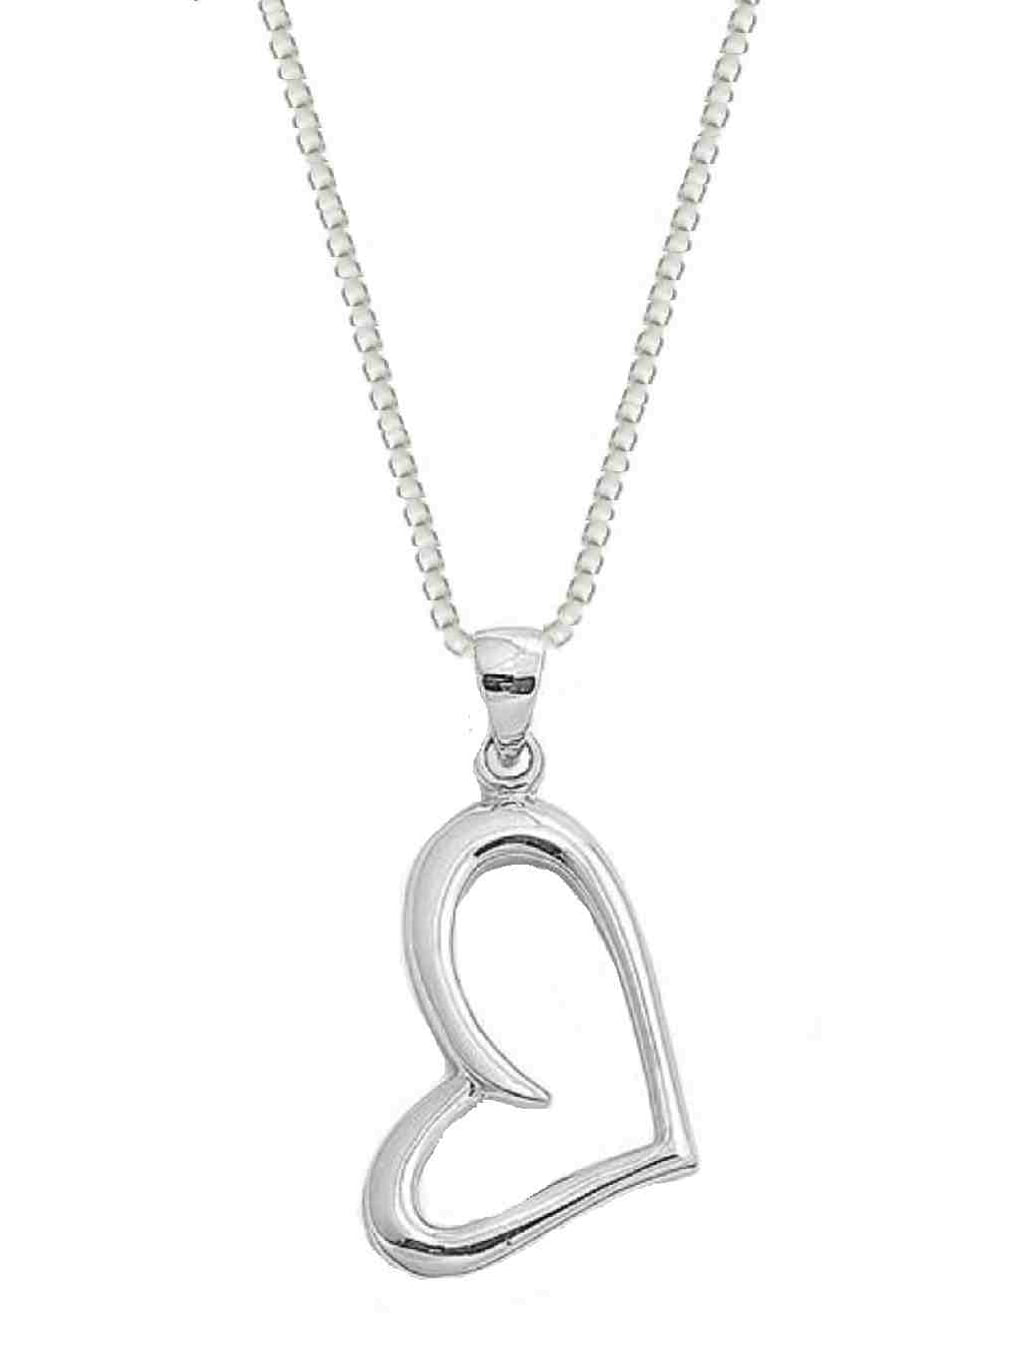 Sterling Silver Side Open Heart Love Charm Womens Pendant Necklace with Chain 